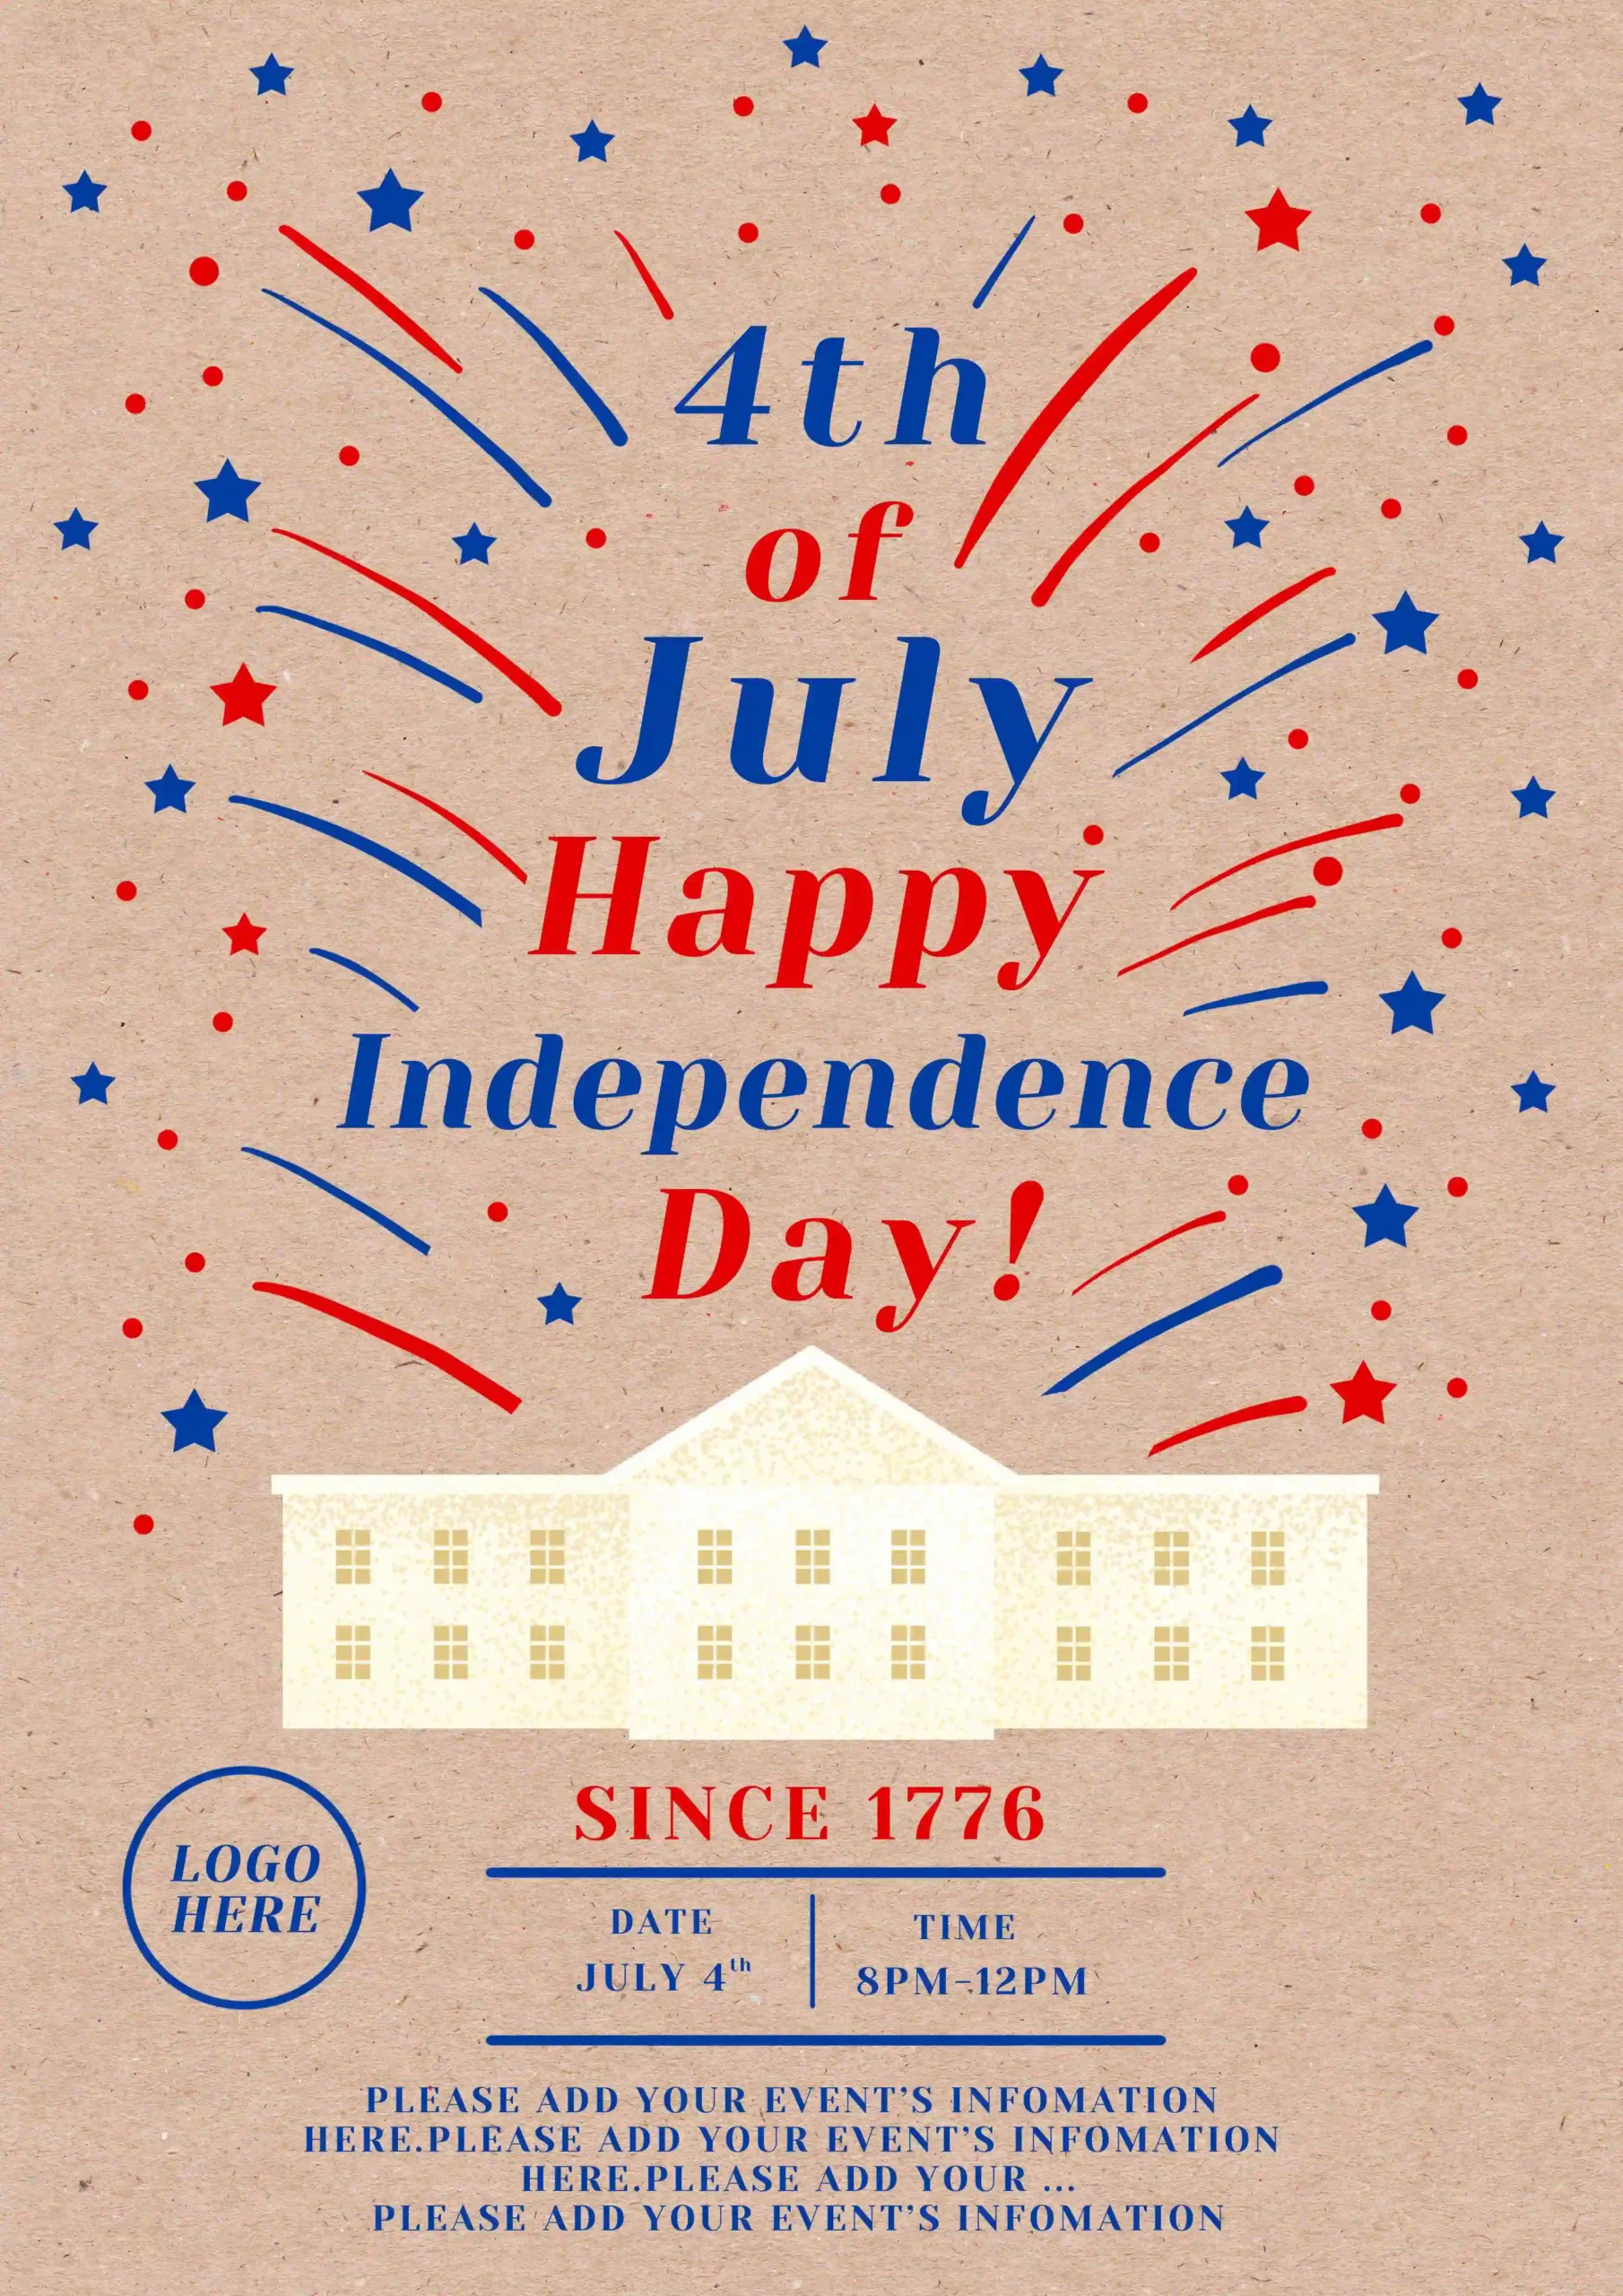 Retro Fireworks American Independence Day Poster PSD Free Download